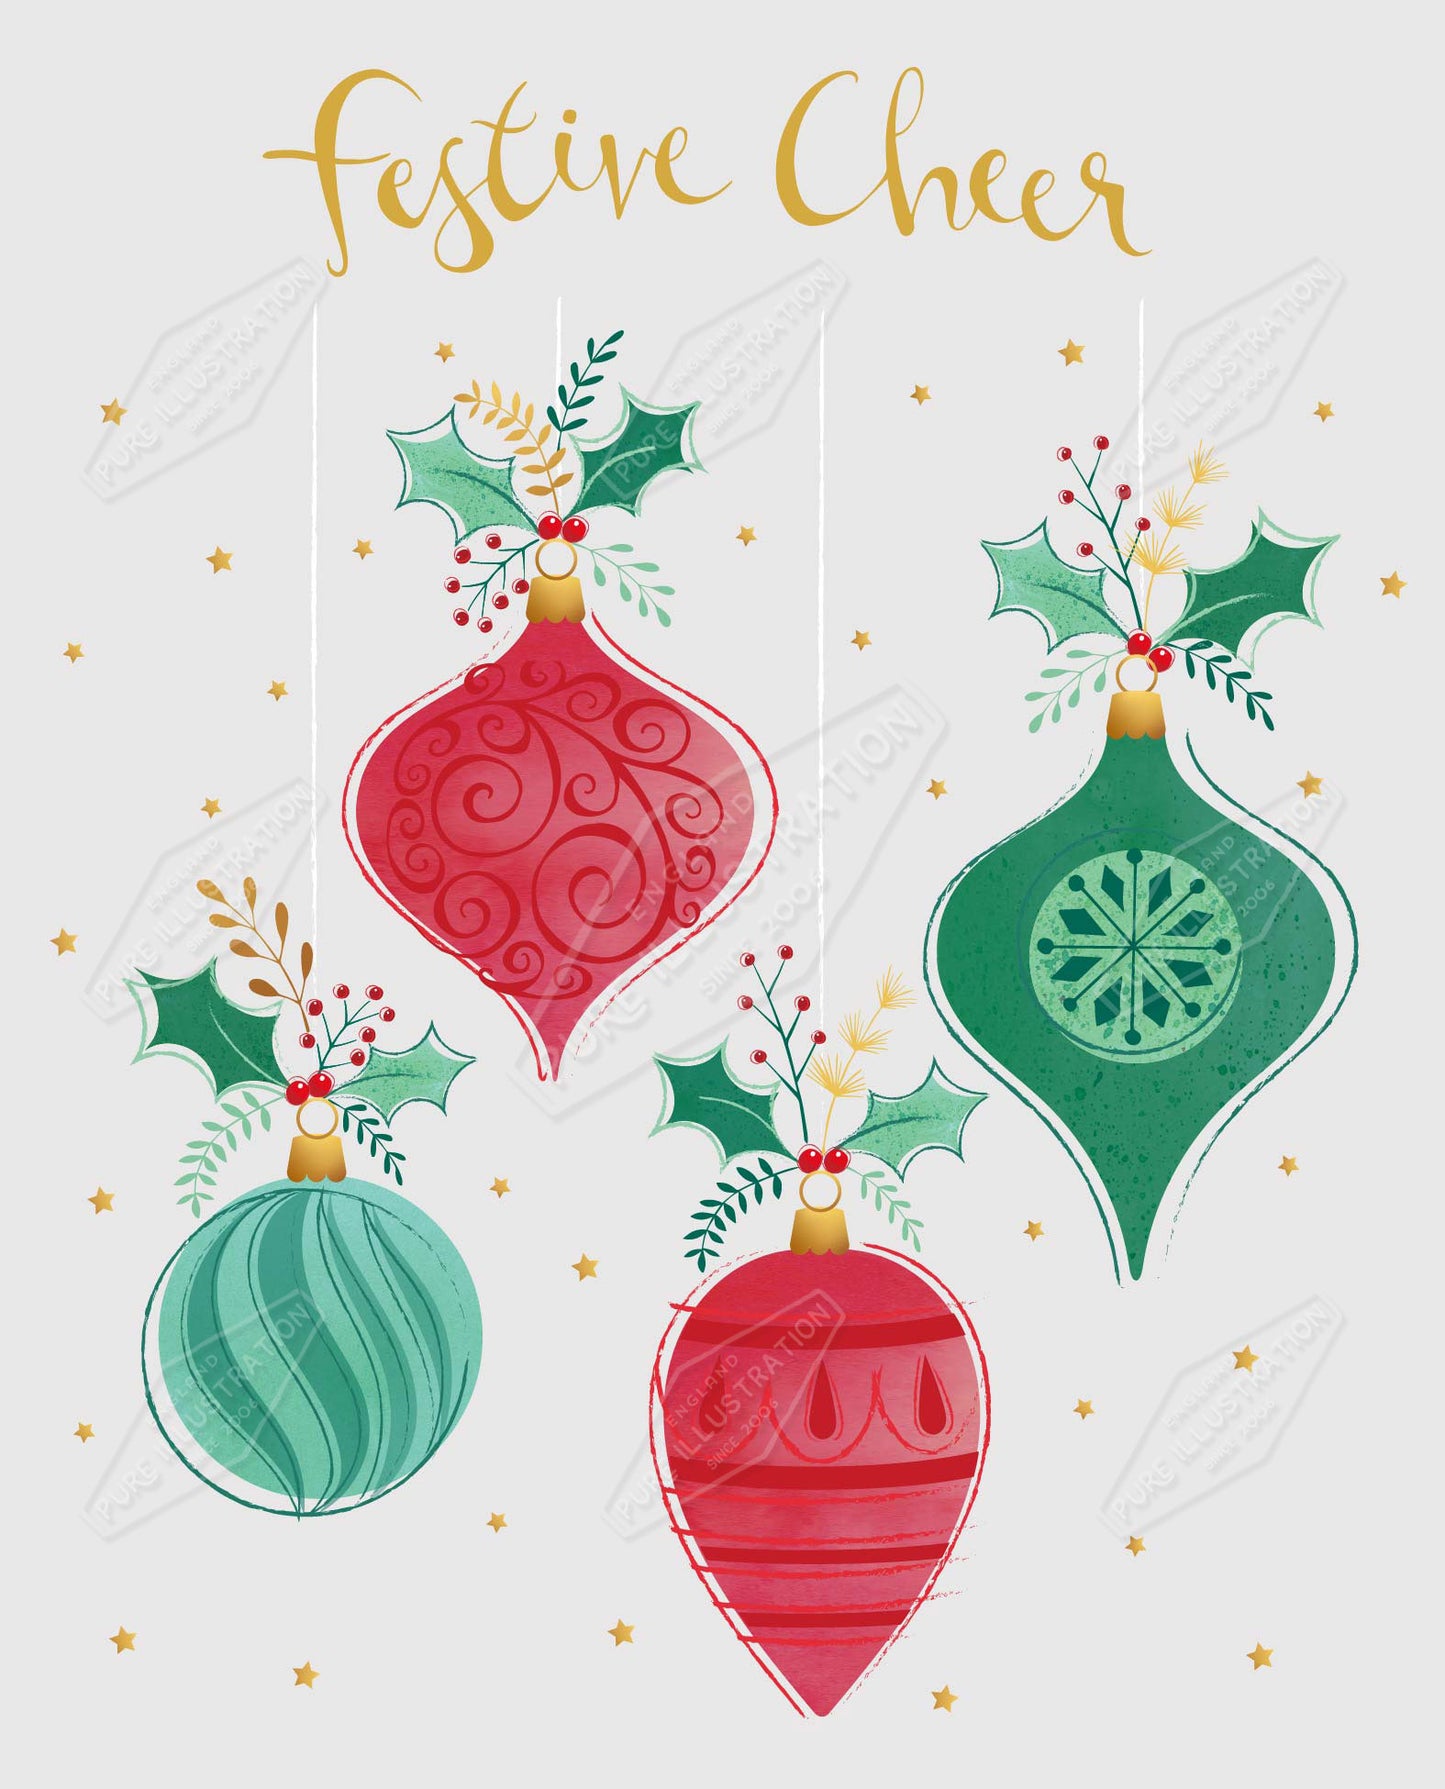 00035260SPI- Sarah Pitt is represented by Pure Art Licensing Agency - Christmas Greeting Card Design